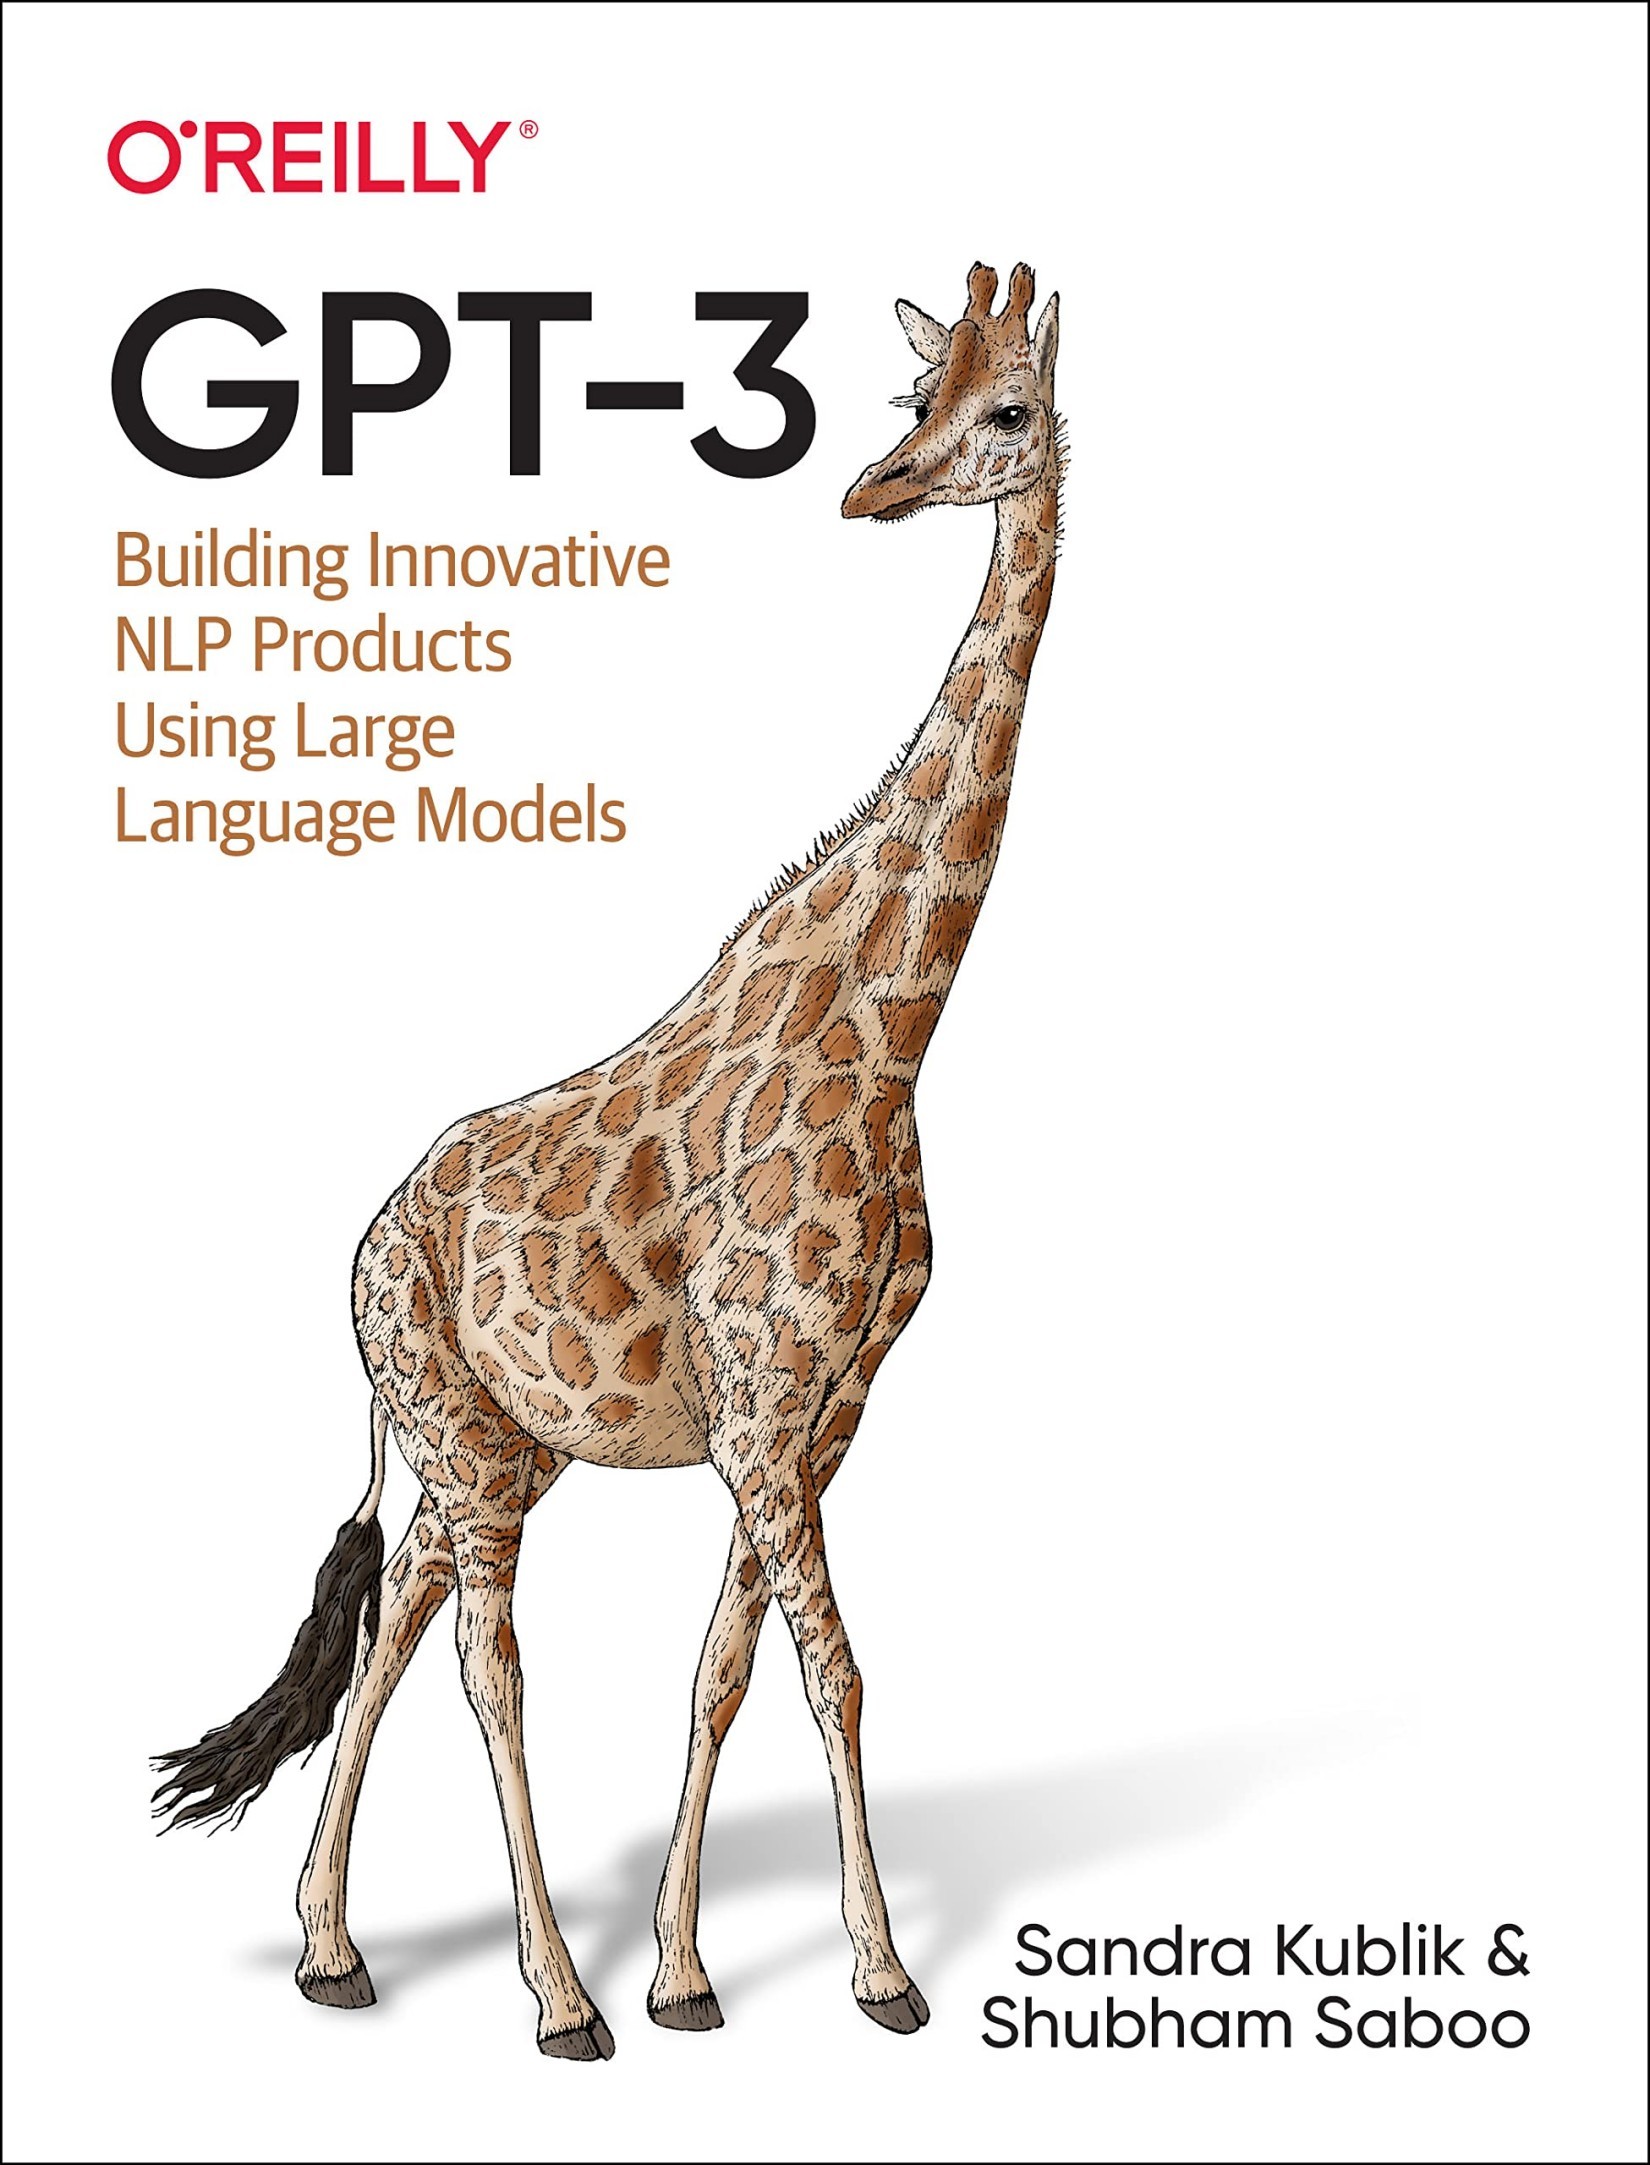 Gpt-3: Building Innovative NLP Products using Large Language Models